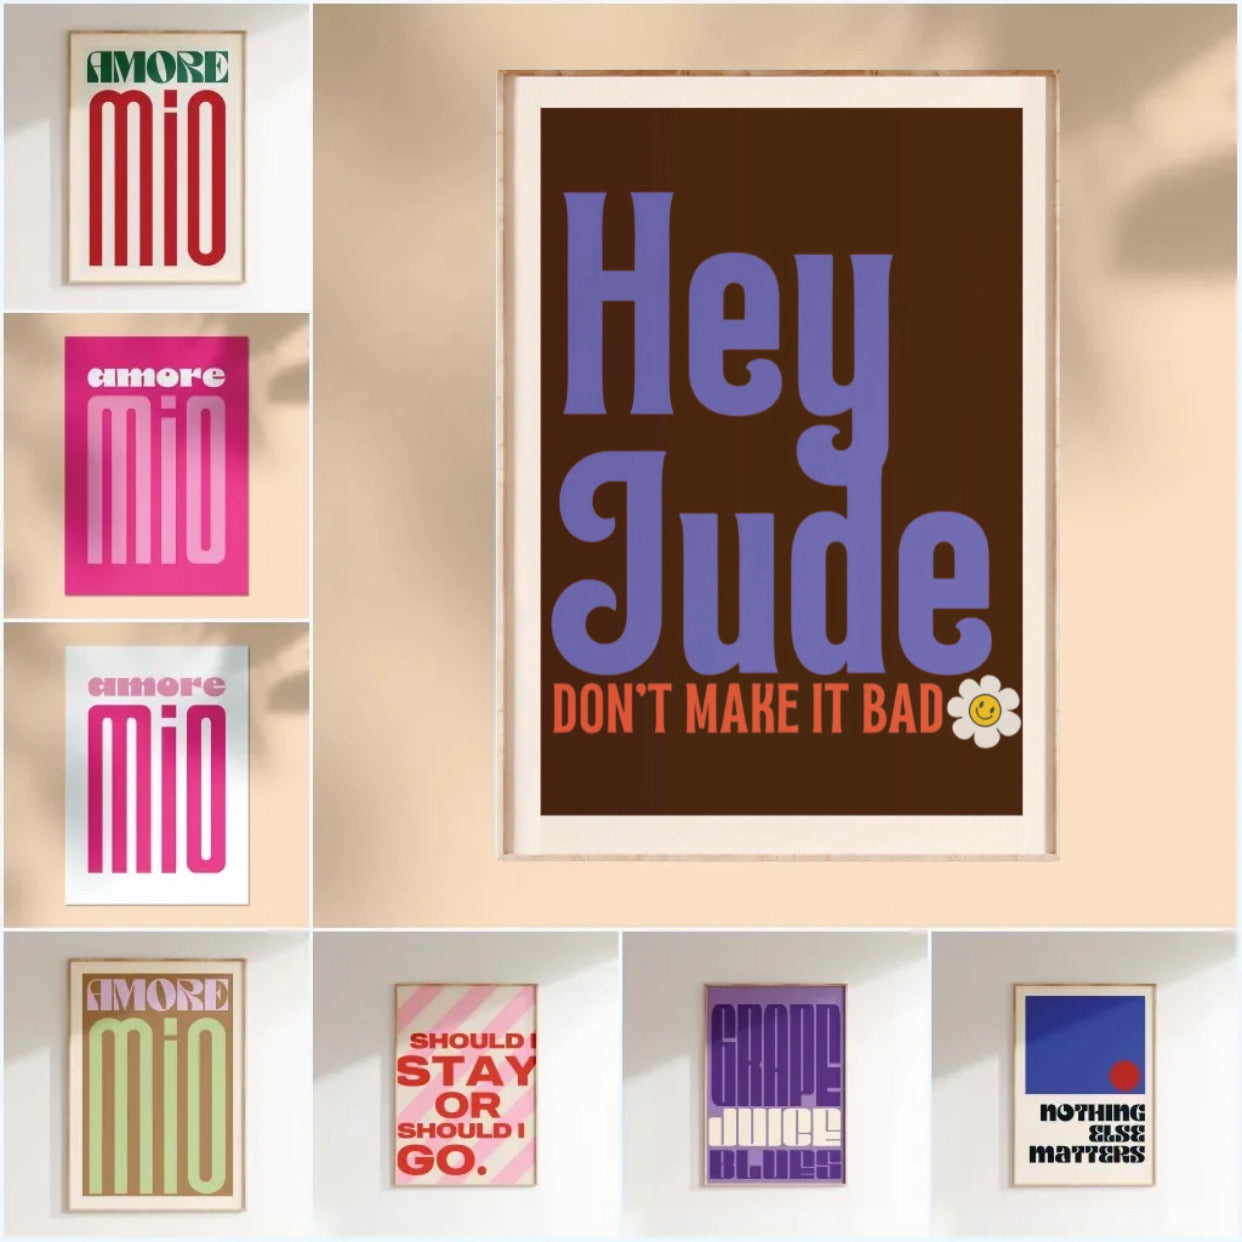 " hey jude don't make it bad" poster